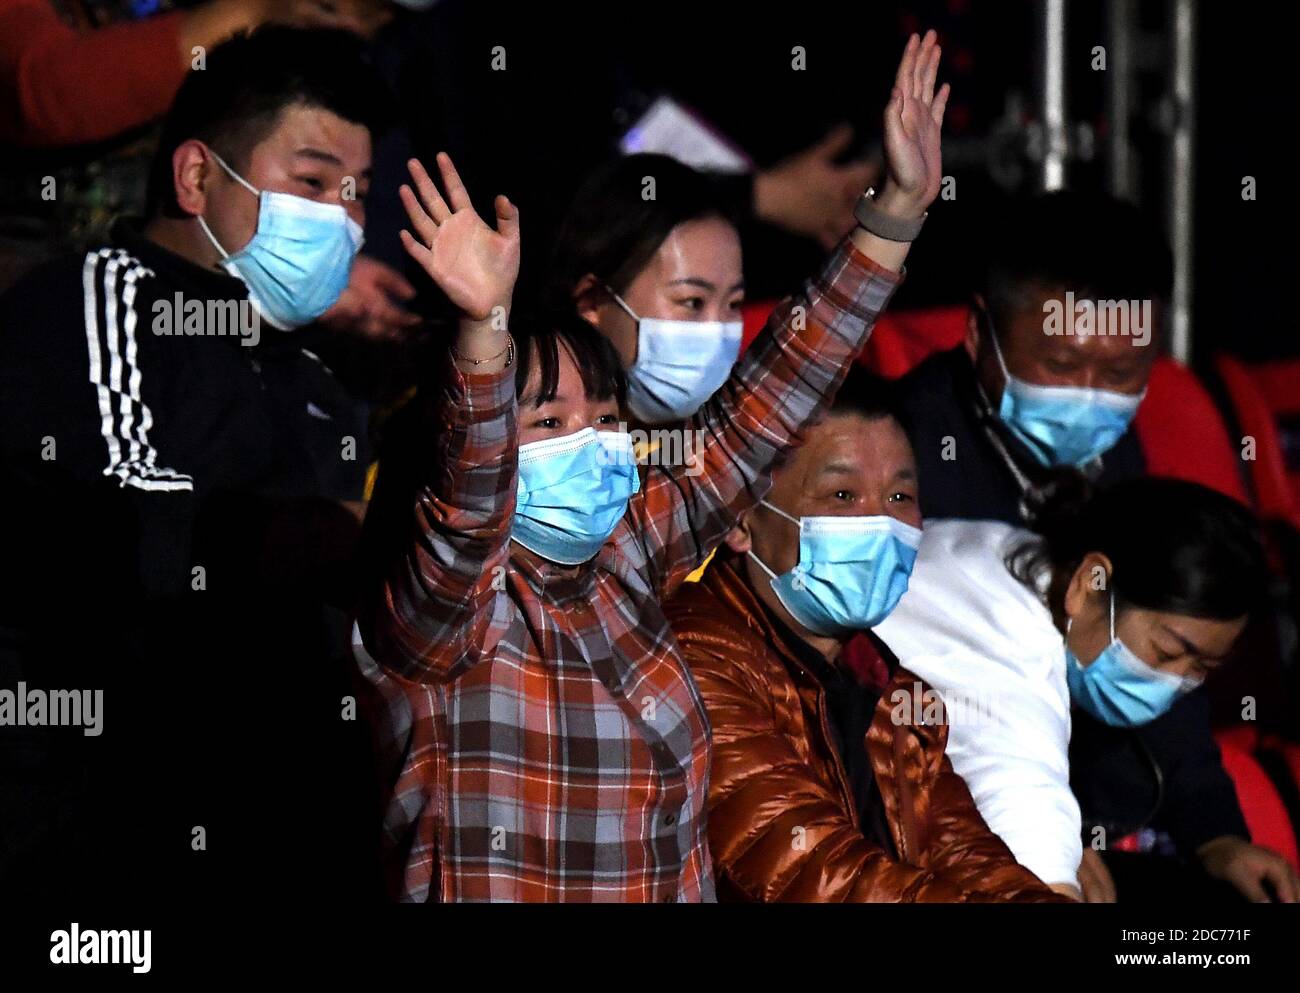 Zhengzhou, China's Henan Province. 19th Nov, 2020. The audience in the tribune watch the match at 2020 ITTF finals in Zhengzhou, capital of central China's Henan Province, Nov. 19, 2020. Since the COVID-19 pandemic outbreak, the 2020 ITTF Finals is the first international tournament staged in China with fans in attendance. Credit: Li An/Xinhua/Alamy Live News Stock Photo